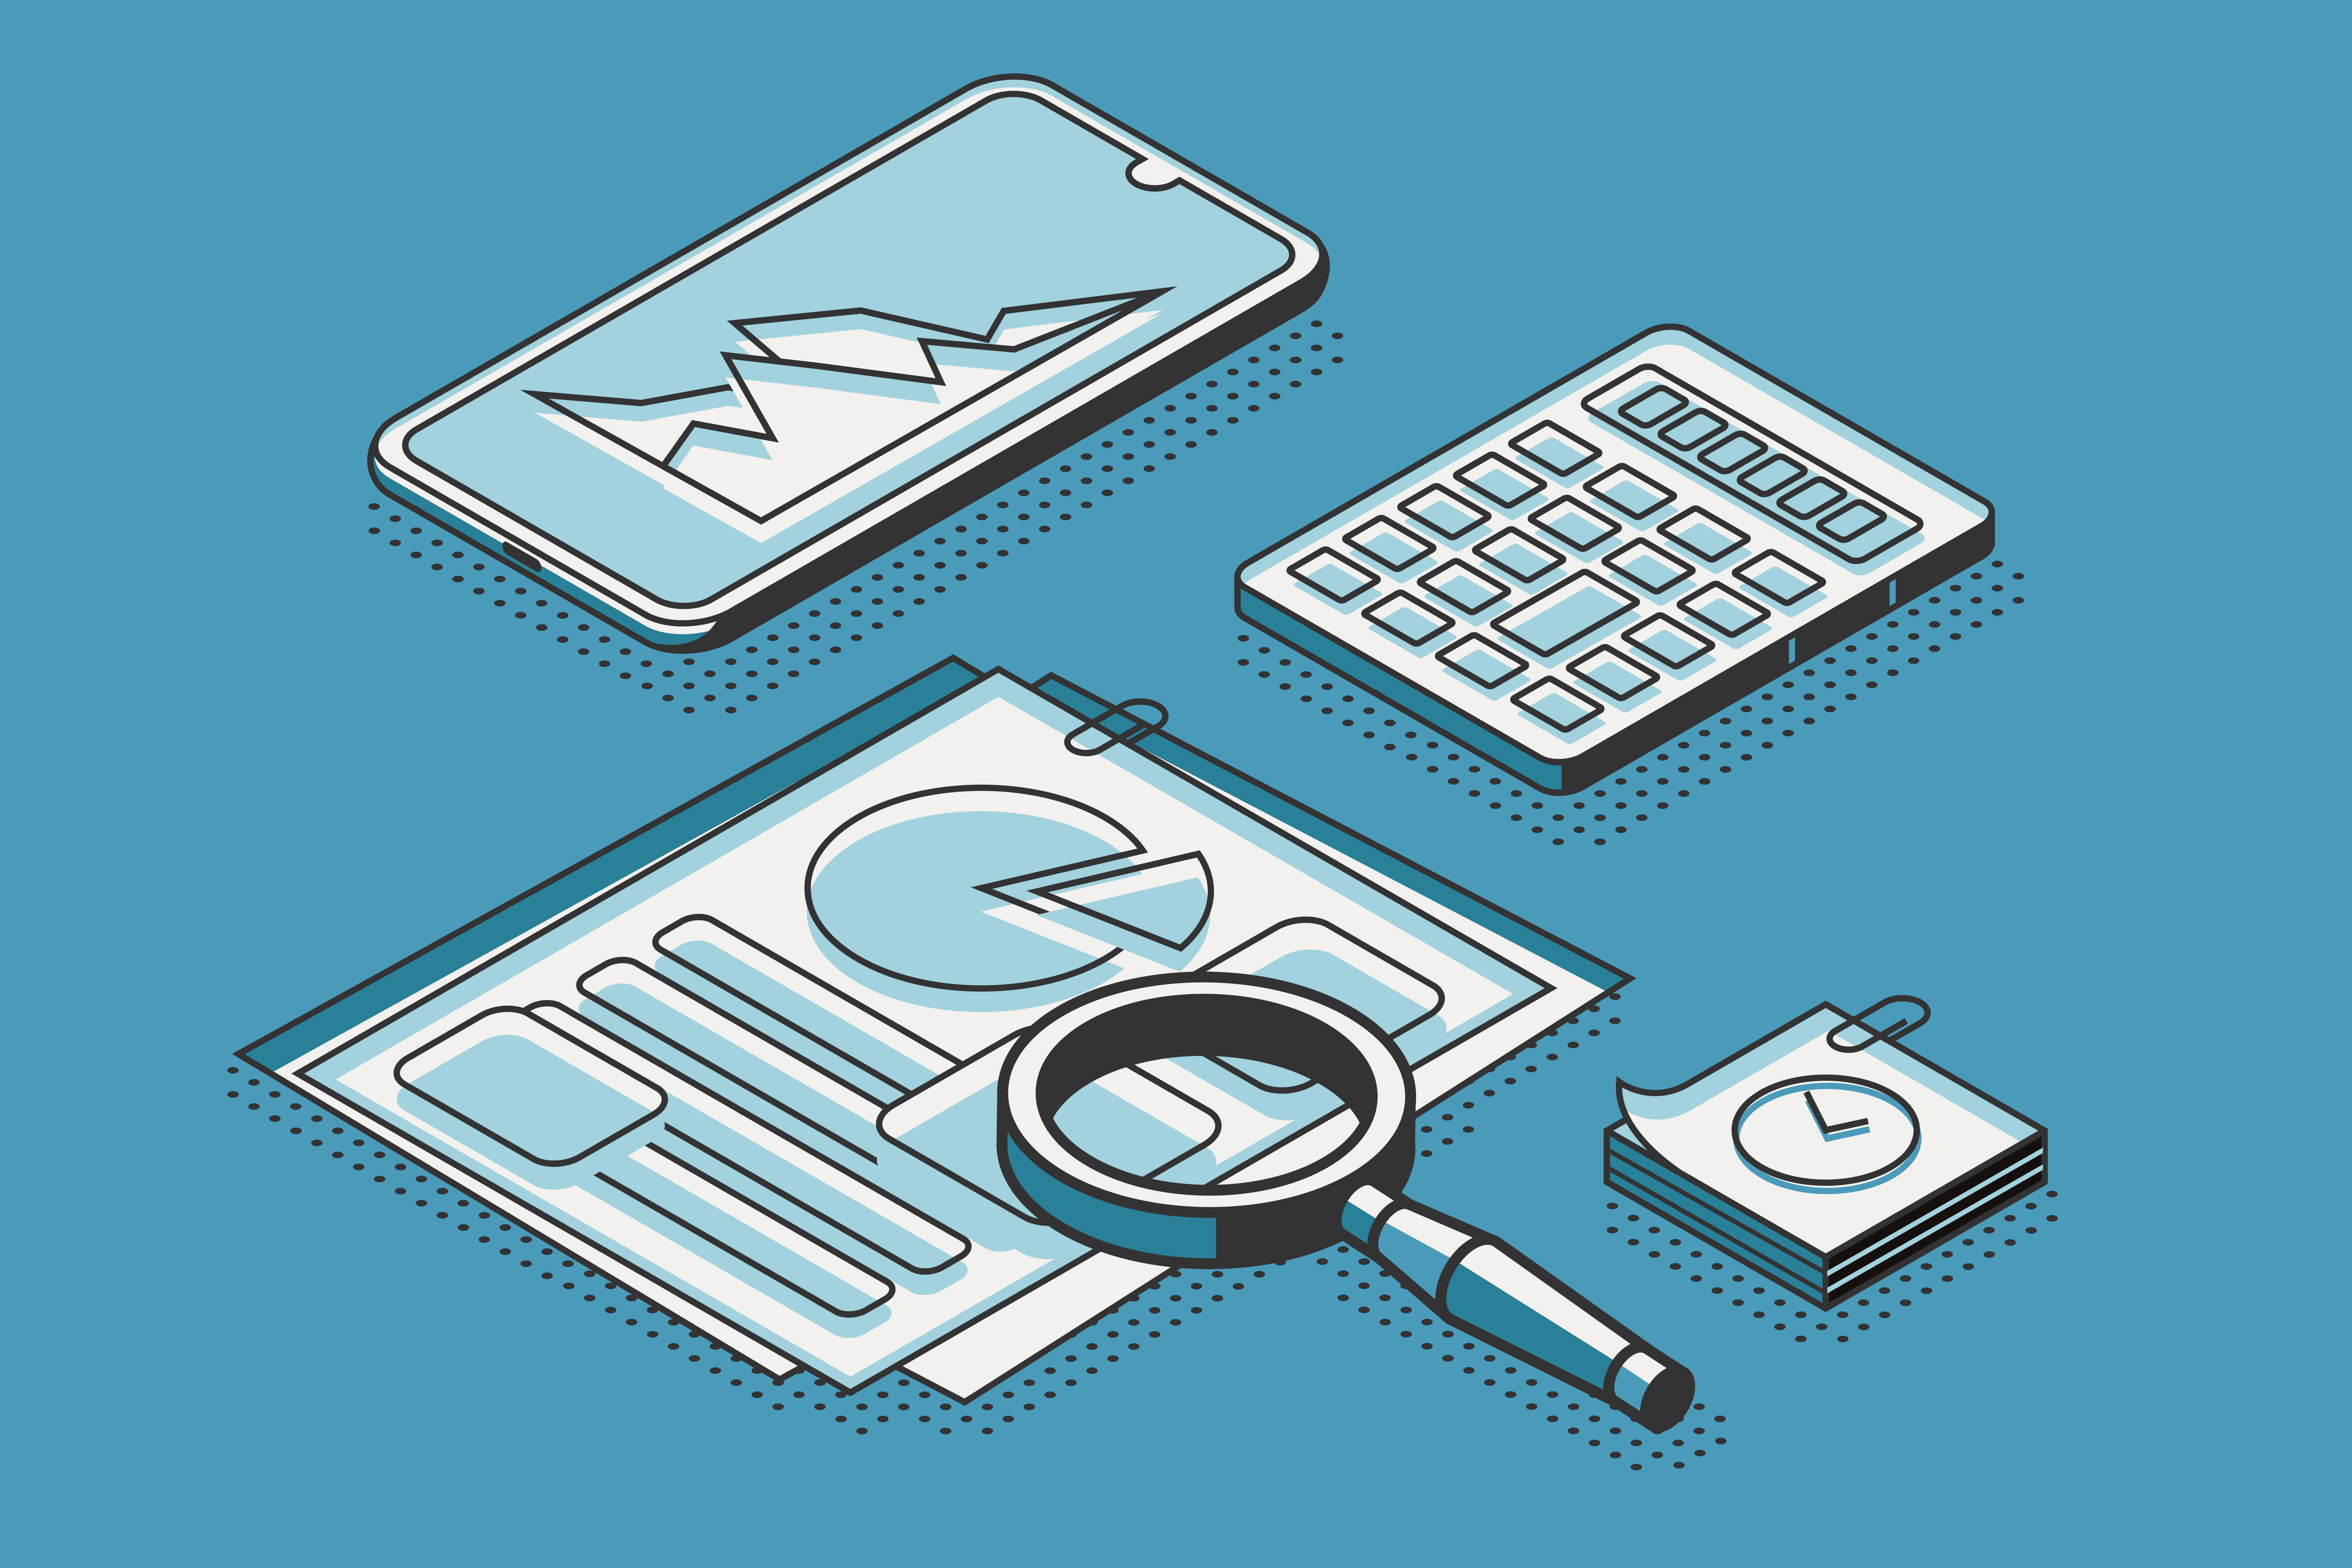 Isometric illustration depicting a variety of business and analysis tools for brand audit, including a smartphone with graphs, a calculator, financial documents under a magnifying glass, and a notepad with a clock,